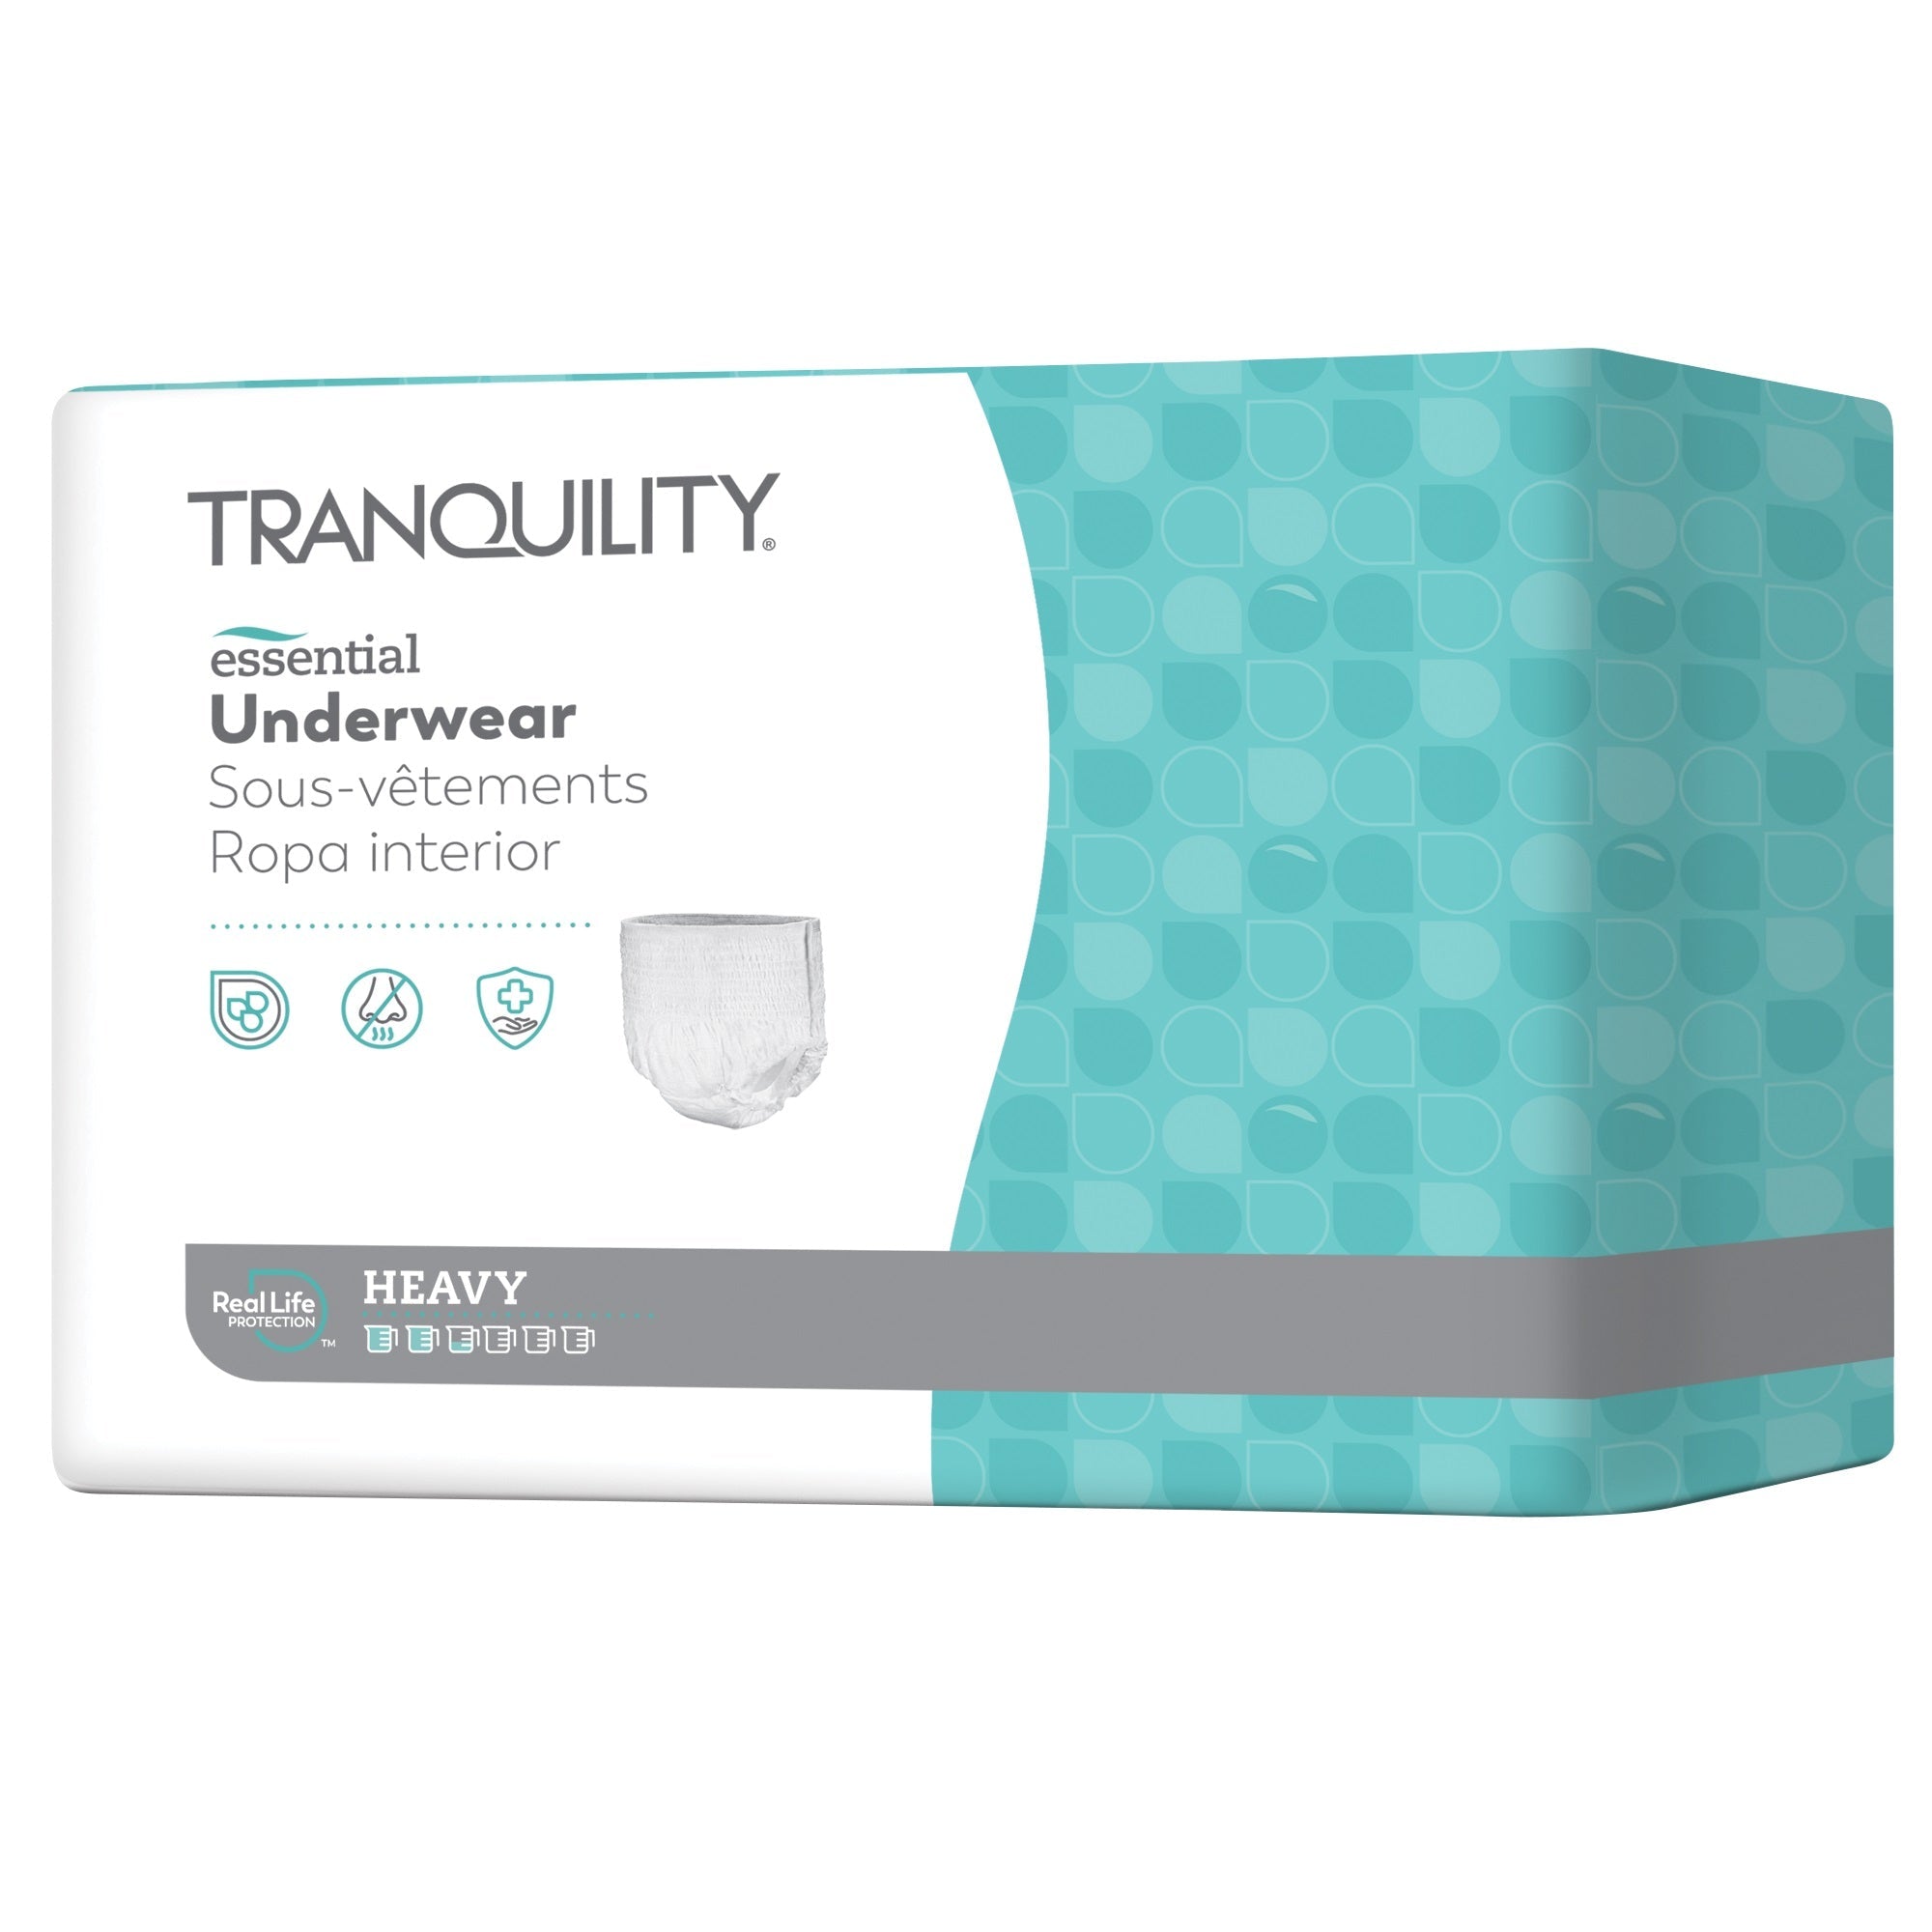 CA/96 - Tranquility® Select® Disposable Absorbent Underwear, 19 oz Fluid Capacity, Extra-Small (15" to 25" Waist/Hip, 65 to 85 lb) - Possible sub for PU2650 - Best Buy Medical Supplies